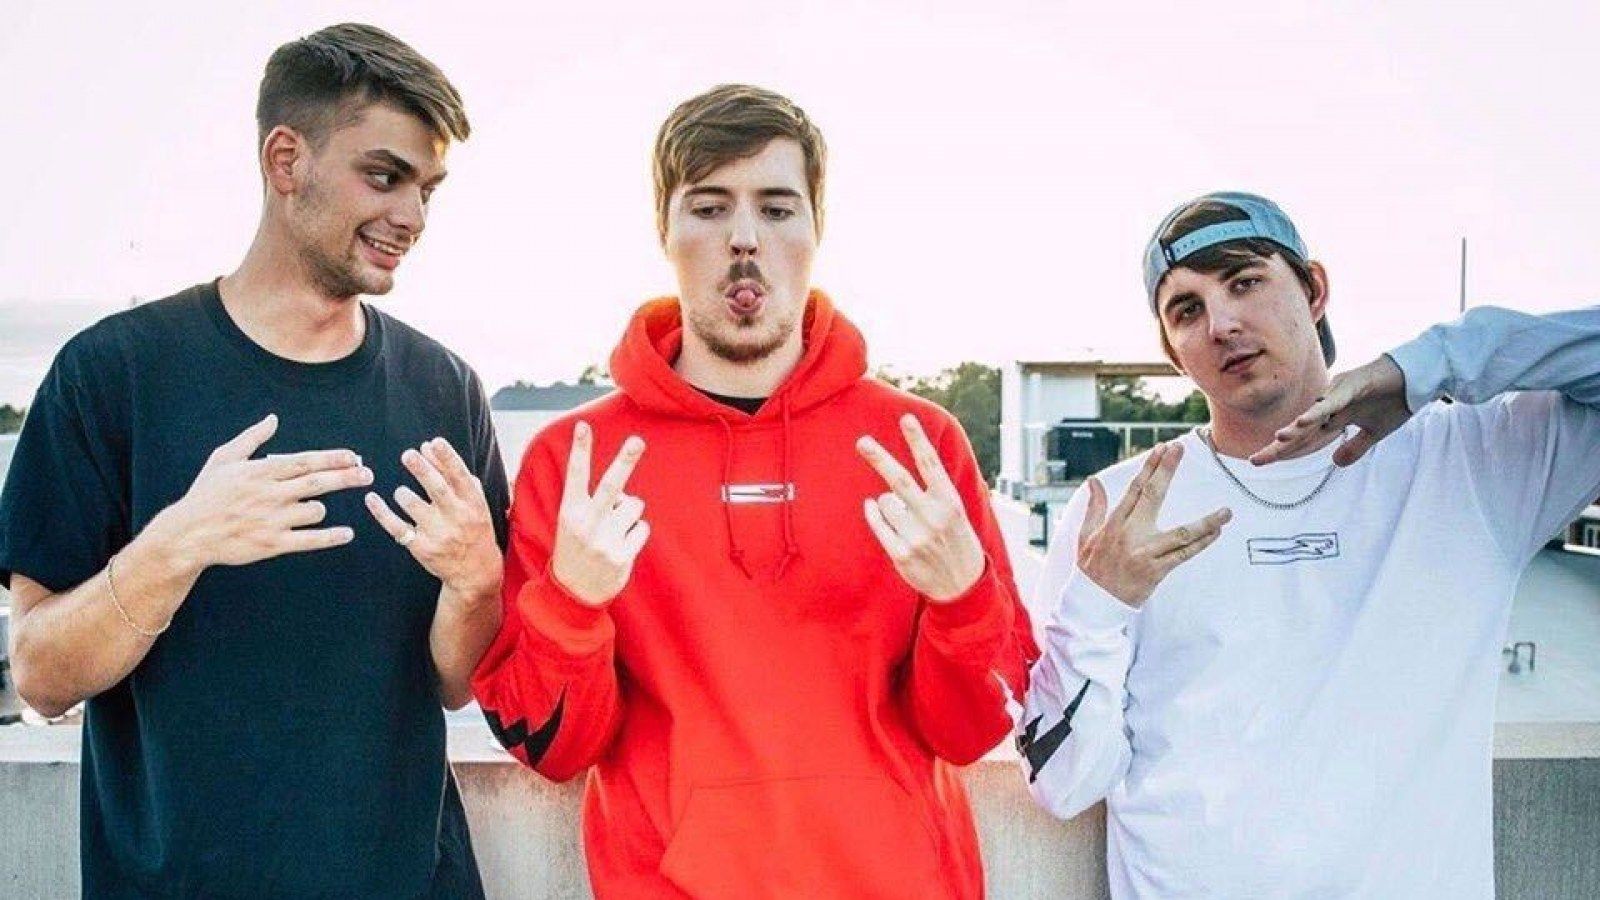 MrBeast's Friends Chris and Chandler Want to Get Verified on Instagram...